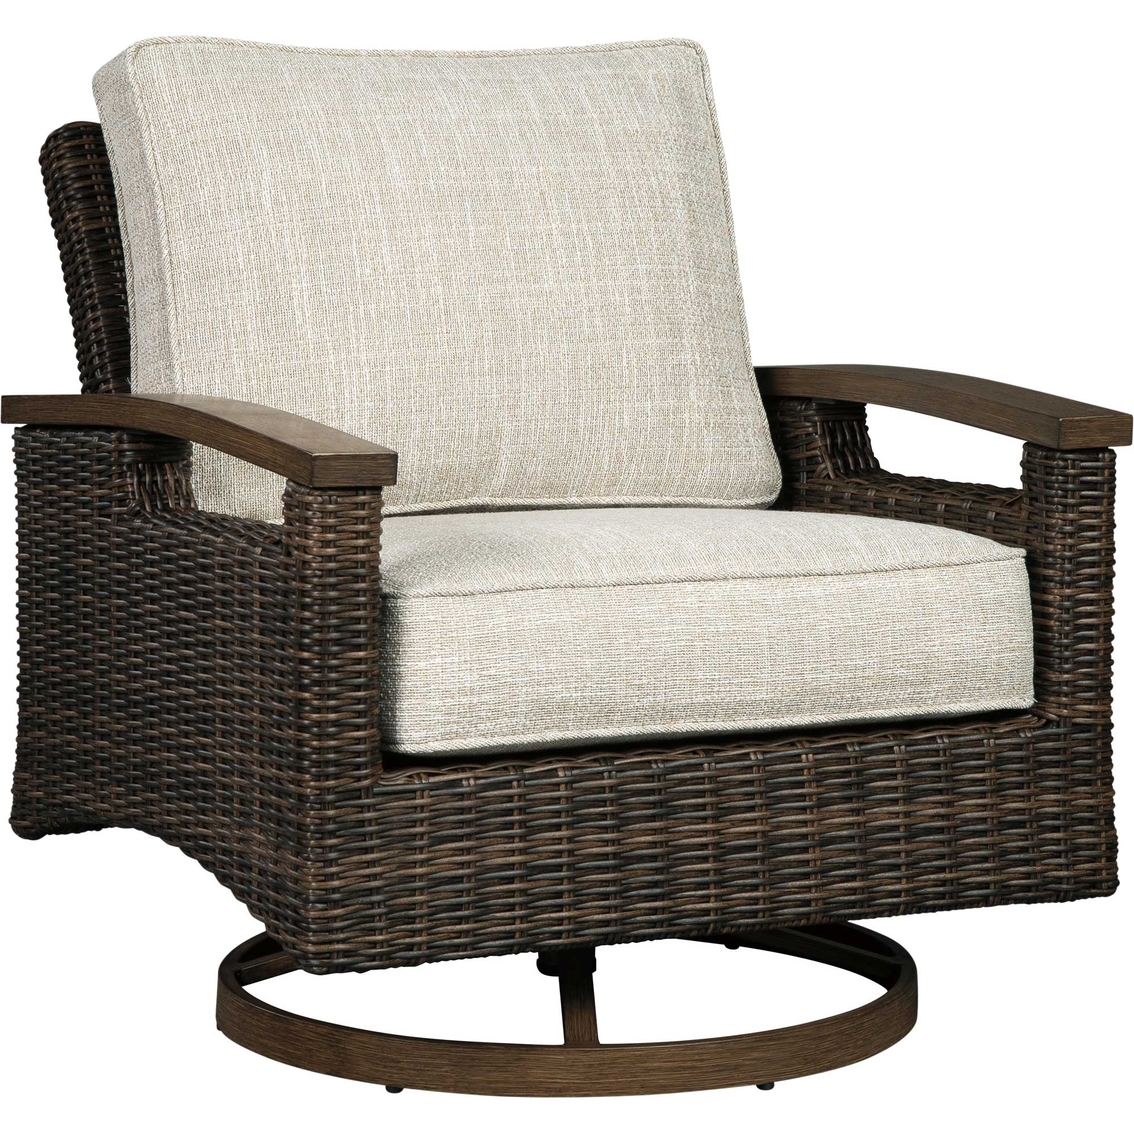 Signature Design by Ashley Paradise Trail 5 pc. Outdoor Seating Set - Image 3 of 9